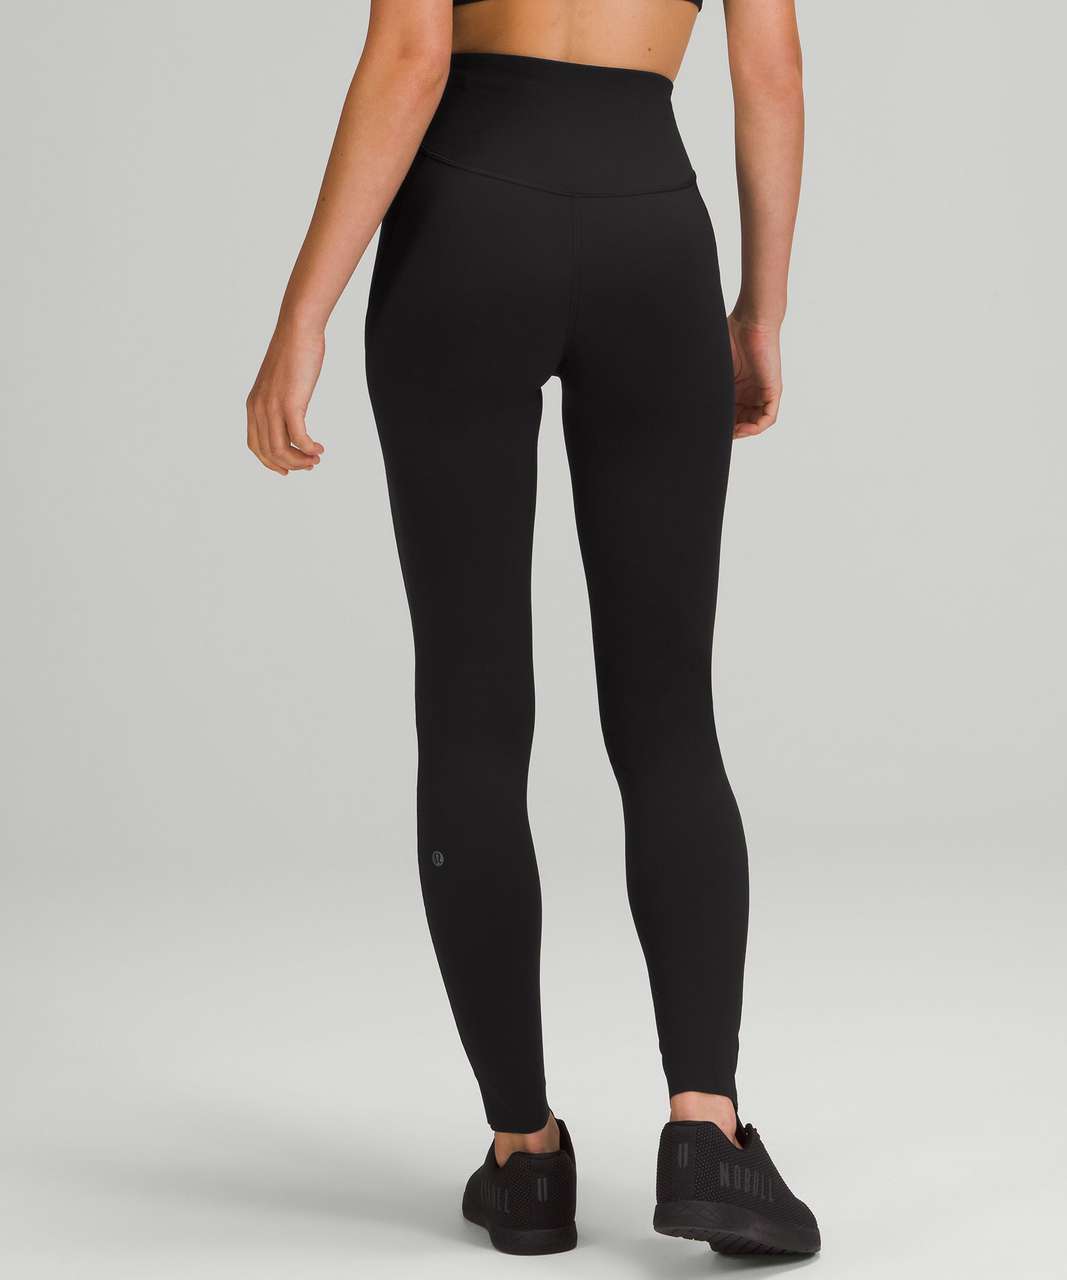 Lululemon Base Pace High-Rise Tight 31" - Black (First Release)